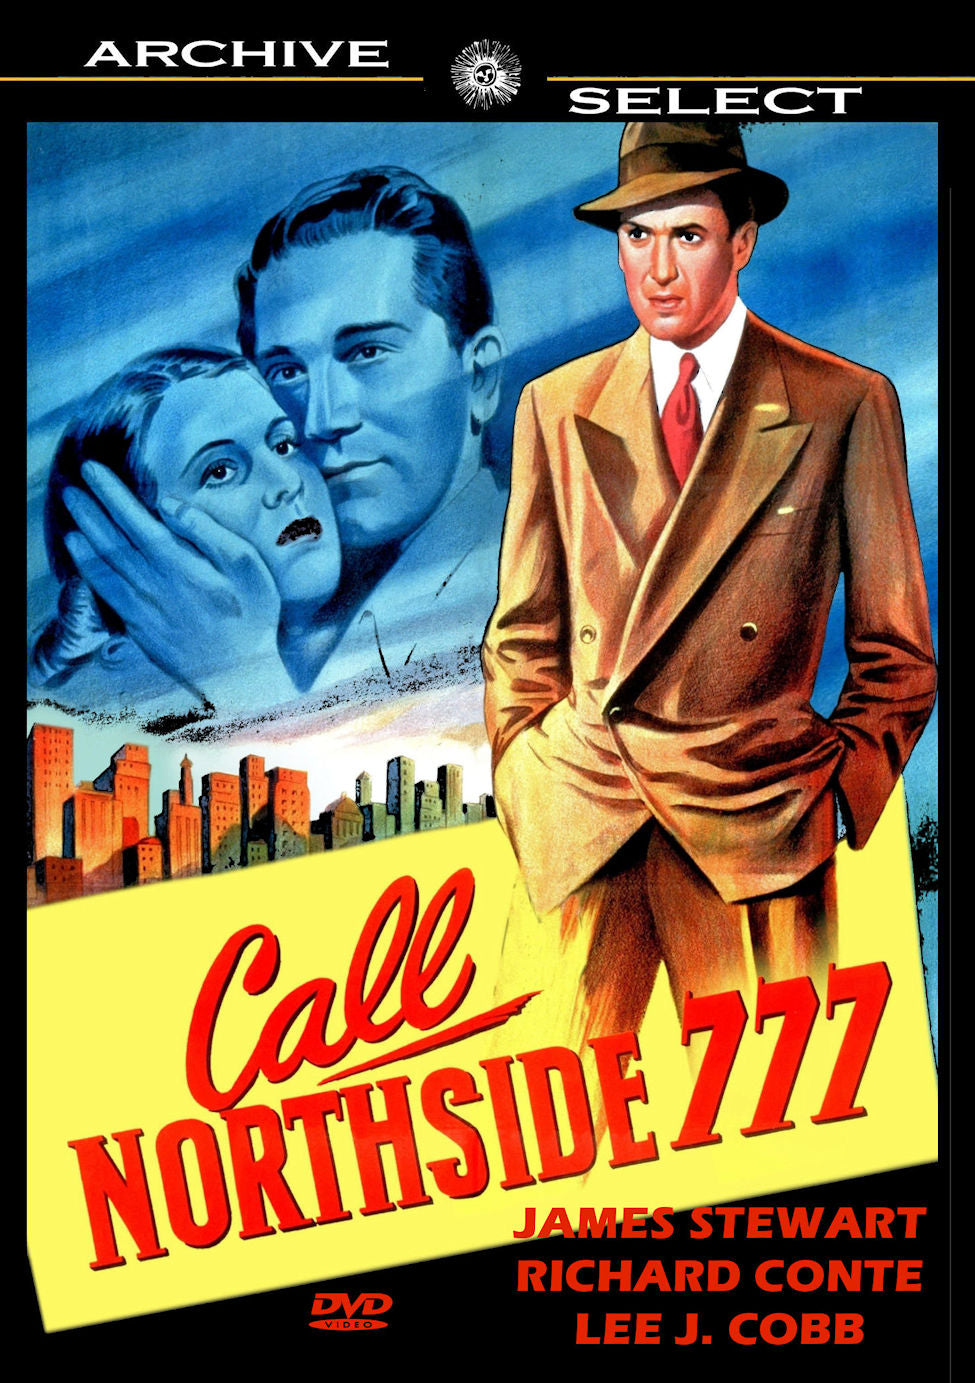 Call Northside 777 1948 James Stewart Richard Conte Lee J. Cobb Chicago Daily Times Henry Hathaway